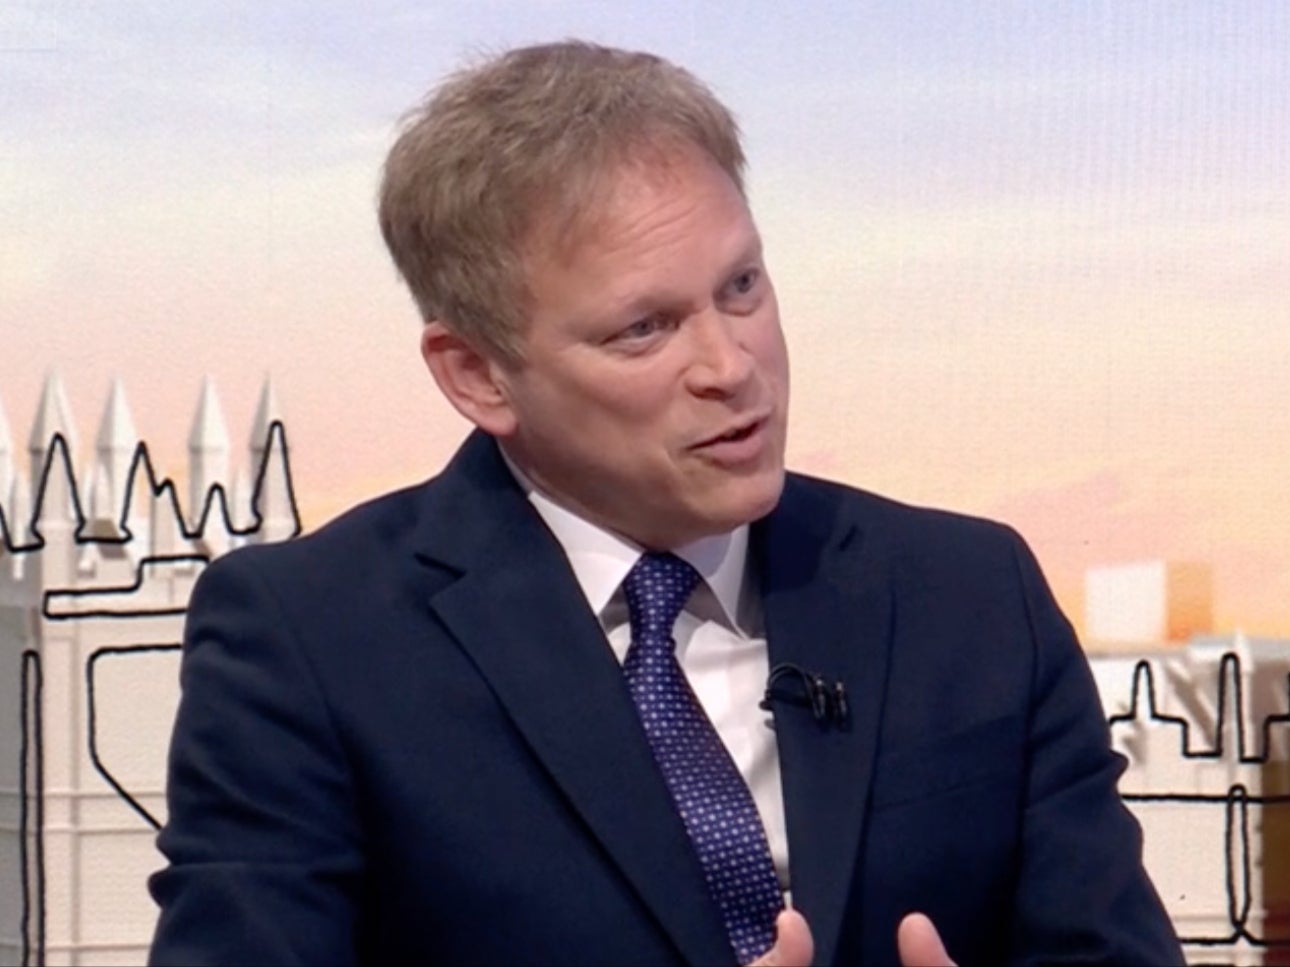 Grant Shapps said that ‘we find ourselves at the dawn of a new era’ and that we are ‘moving from a post-war to a pre-war world’